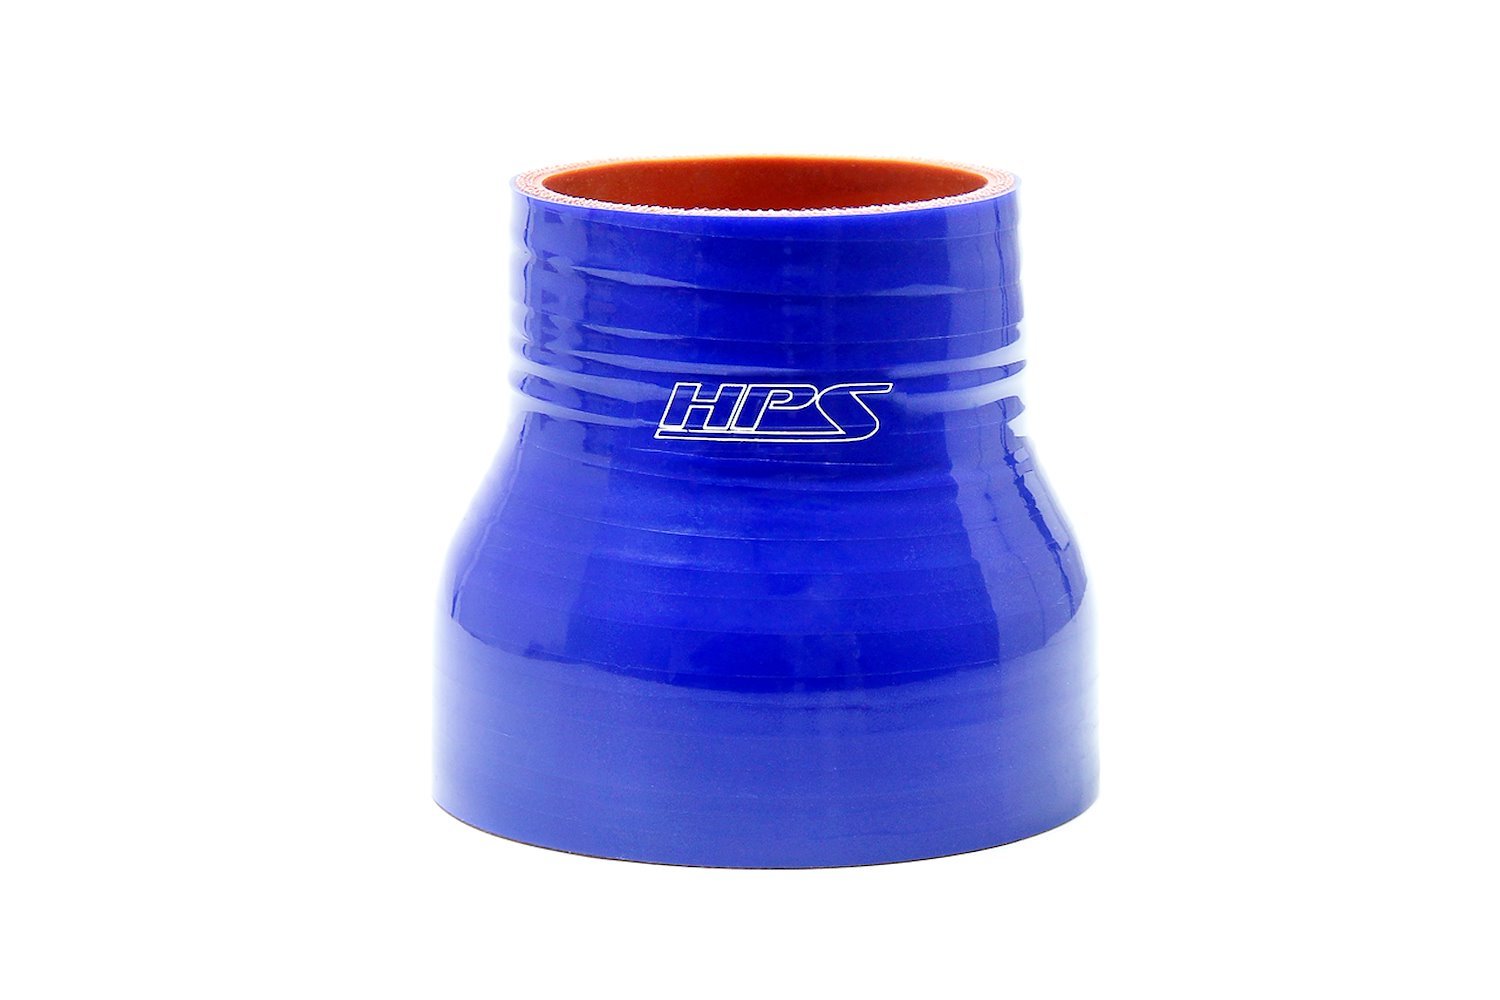 HTSR-312-325-BLUE Silicone Reducer Hose, High-Temp 4-Ply Reinforced, 3-1/8 in. - 3-1/4 in. ID, 3 in. Long, Blue